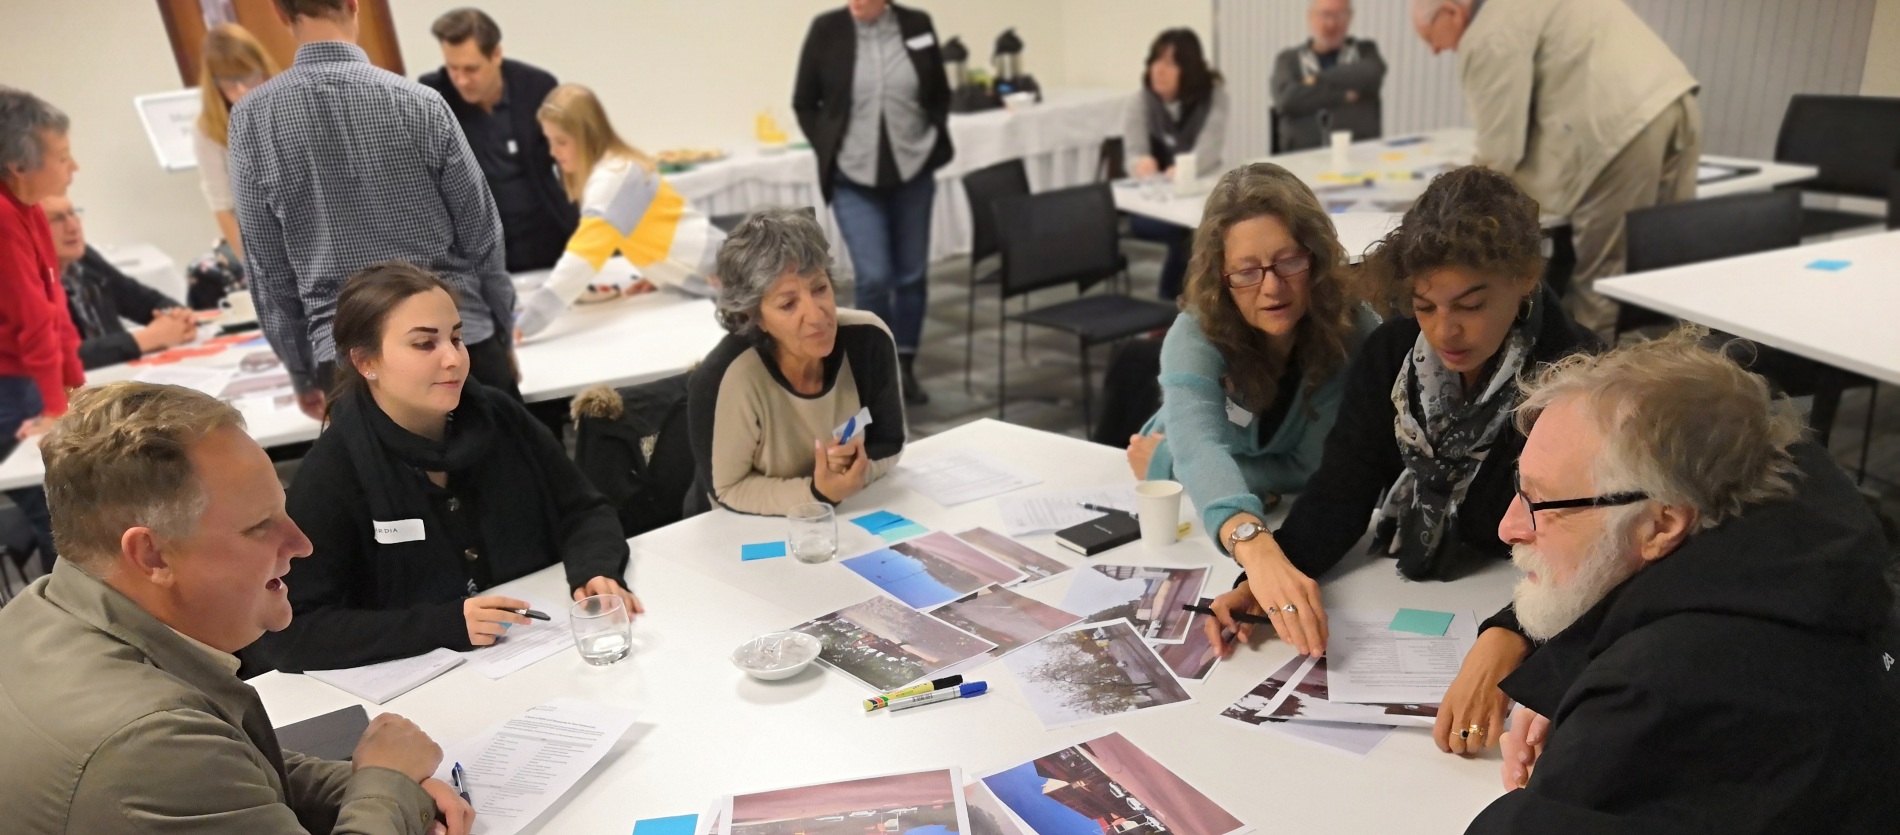 A Community Workshop taking place in the City of Kalamunda Administration Centre Function Room